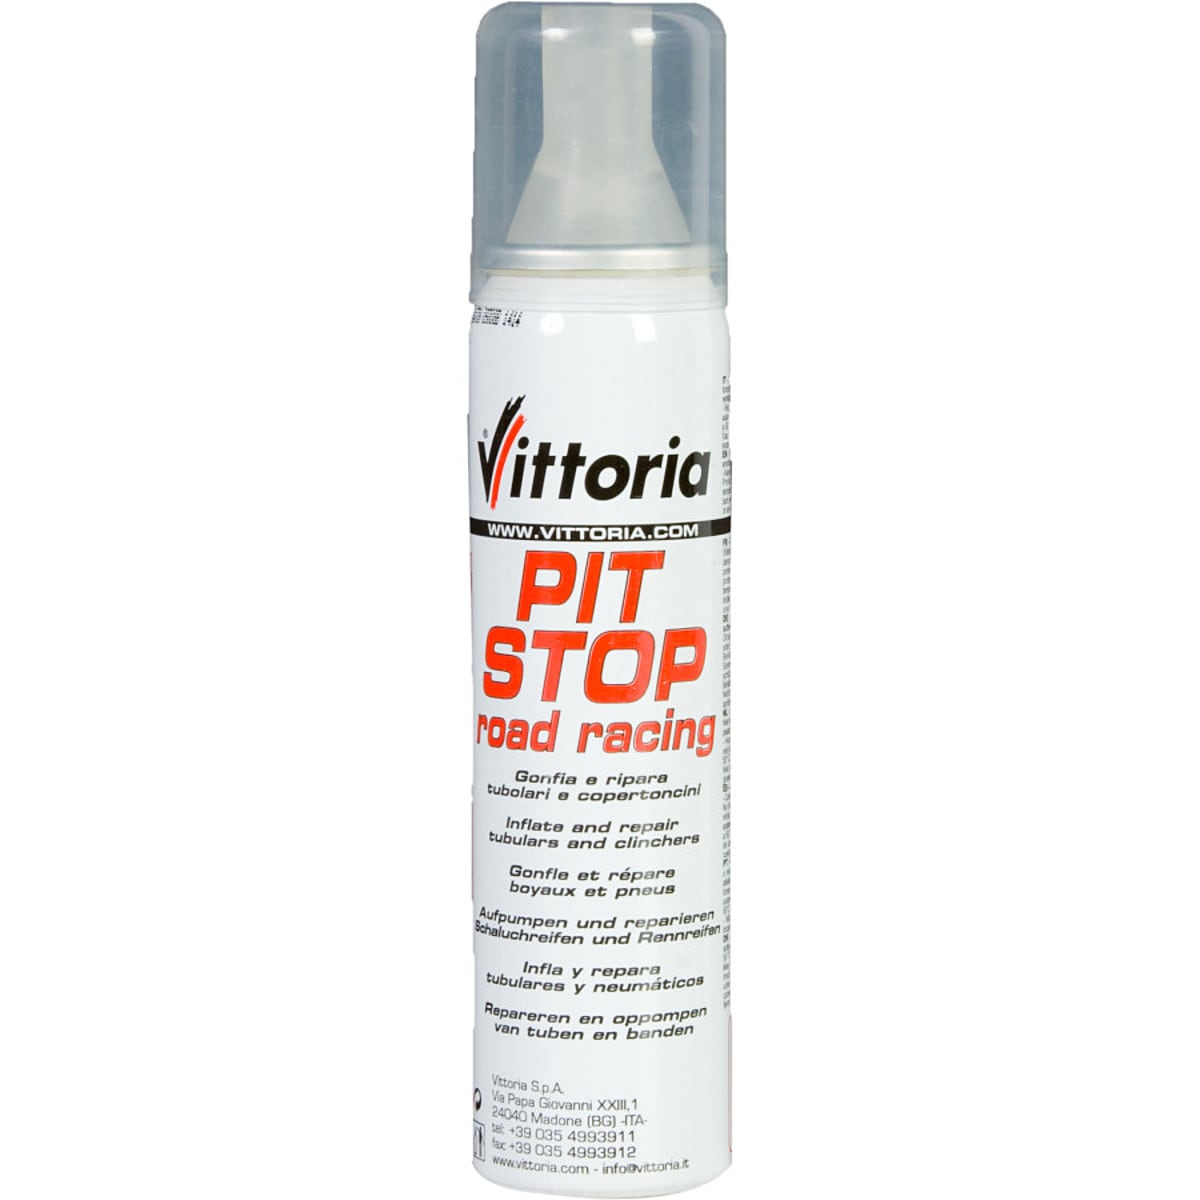 Vittoria Pit-Stop Road Racing Tube and Tire Repair Kit No Mount, One Size